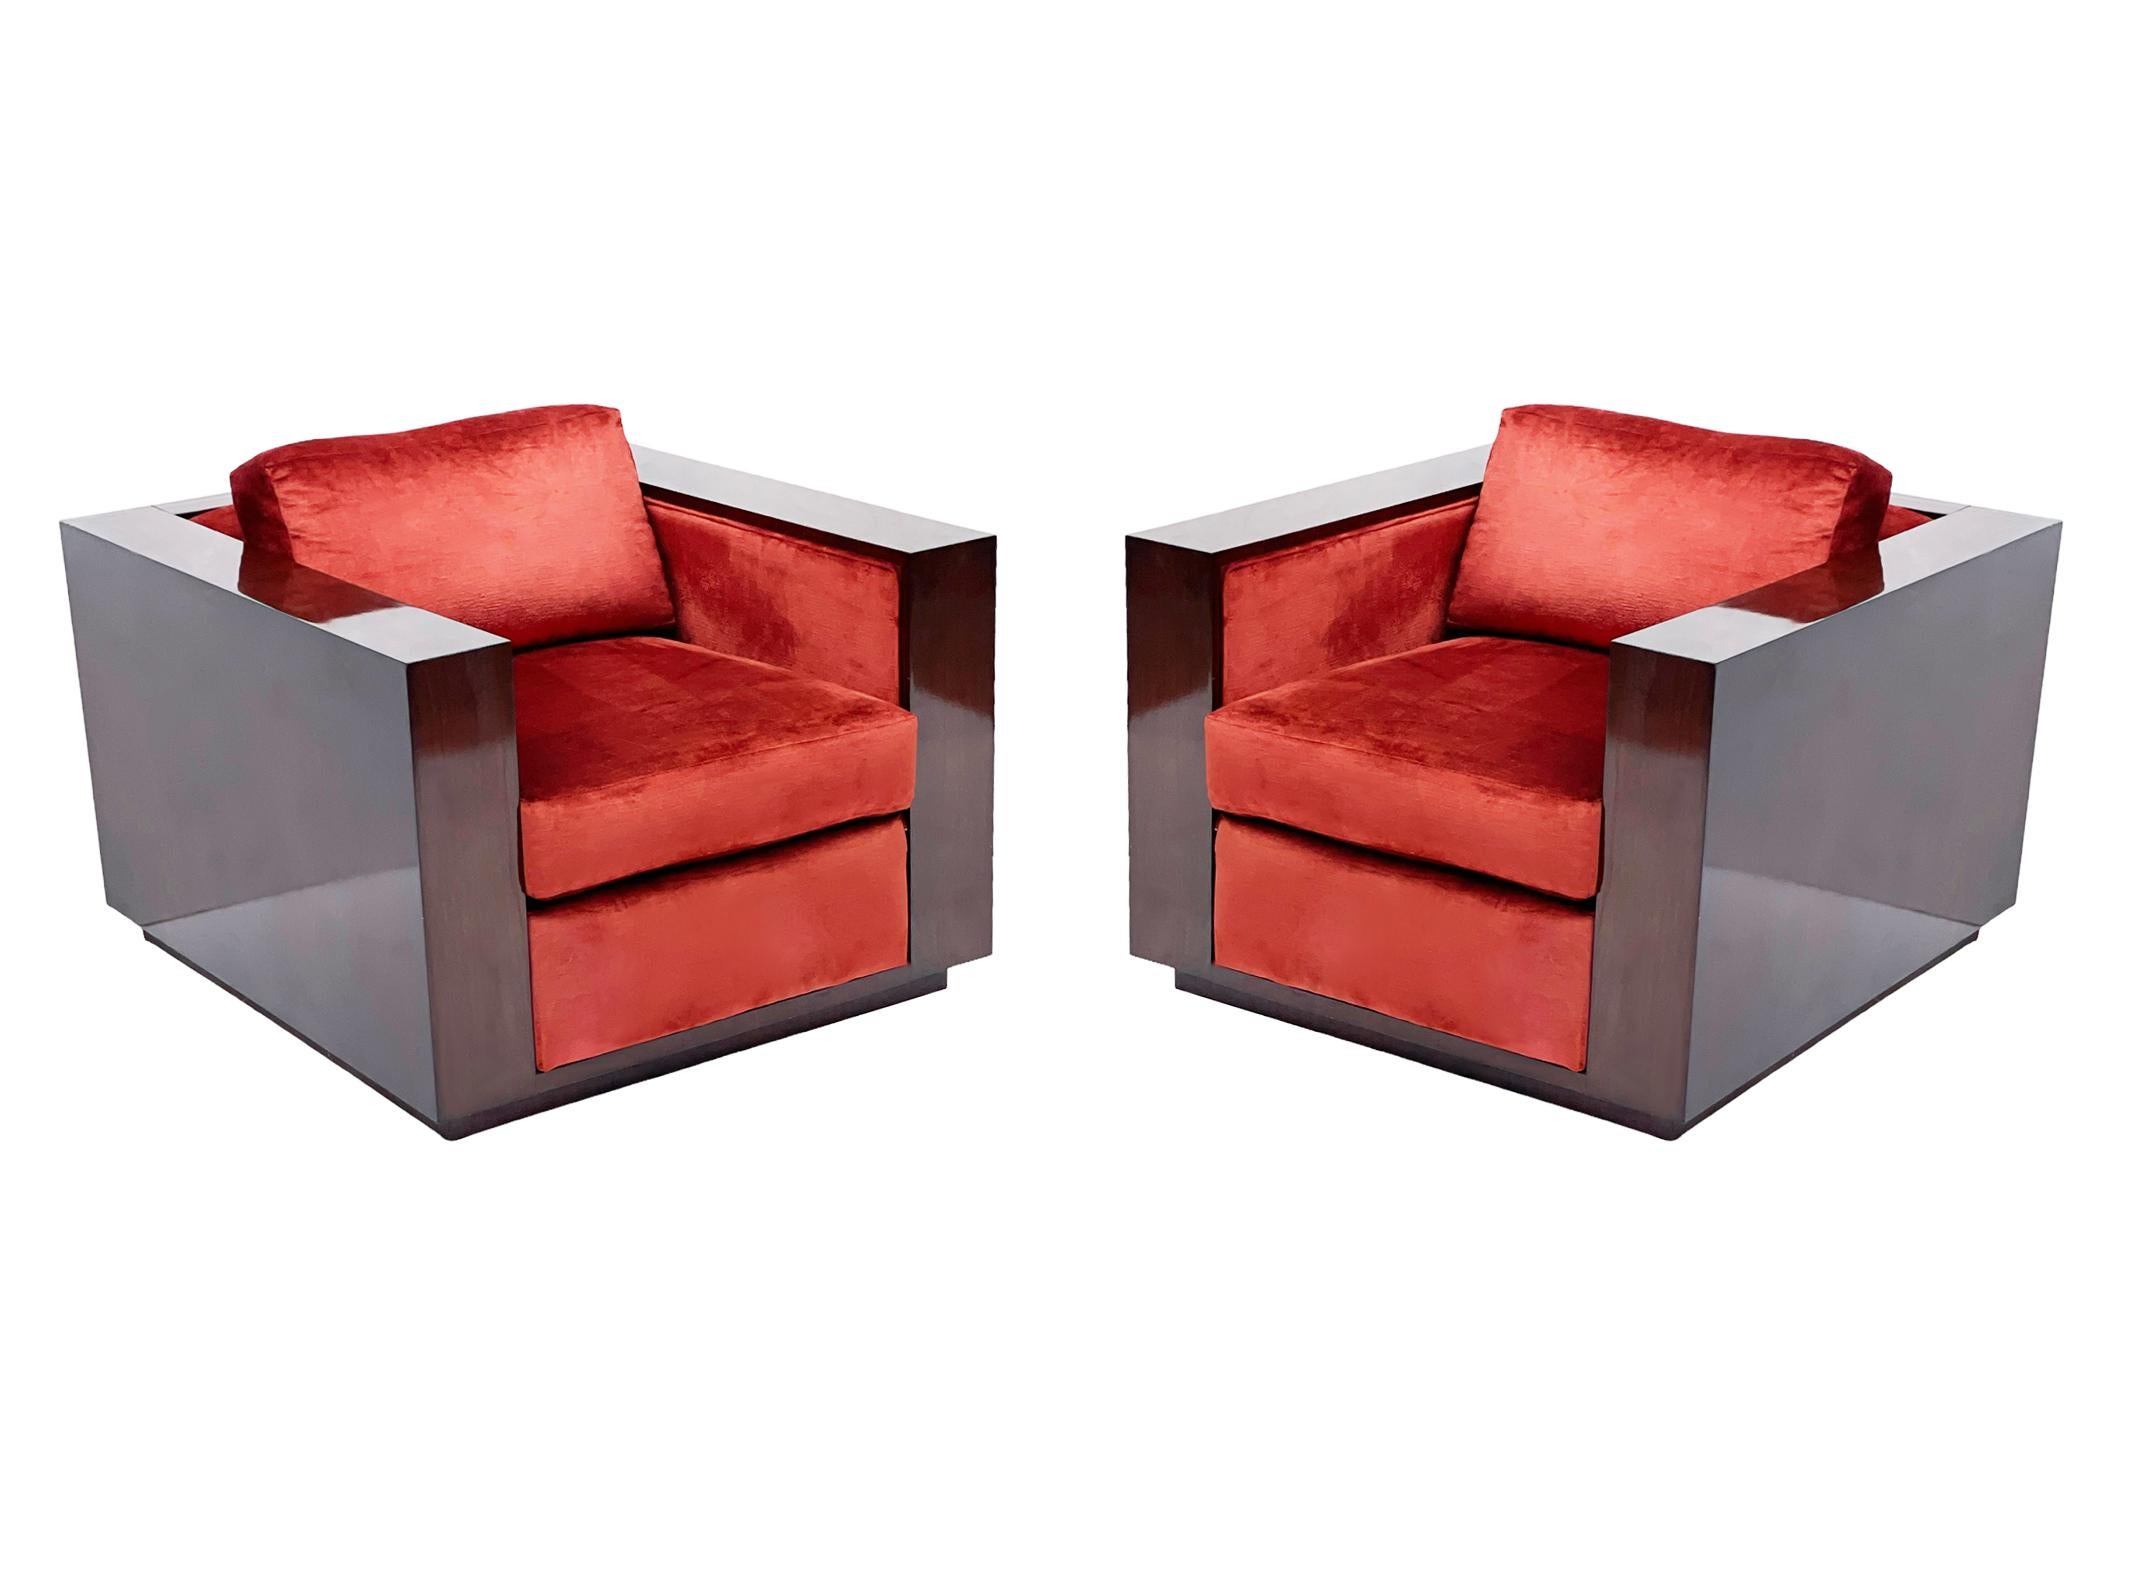 Late 20th Century Pair of Mid Century Art Deco Mahogany Cube Club Chairs by Ralph Lauren  For Sale